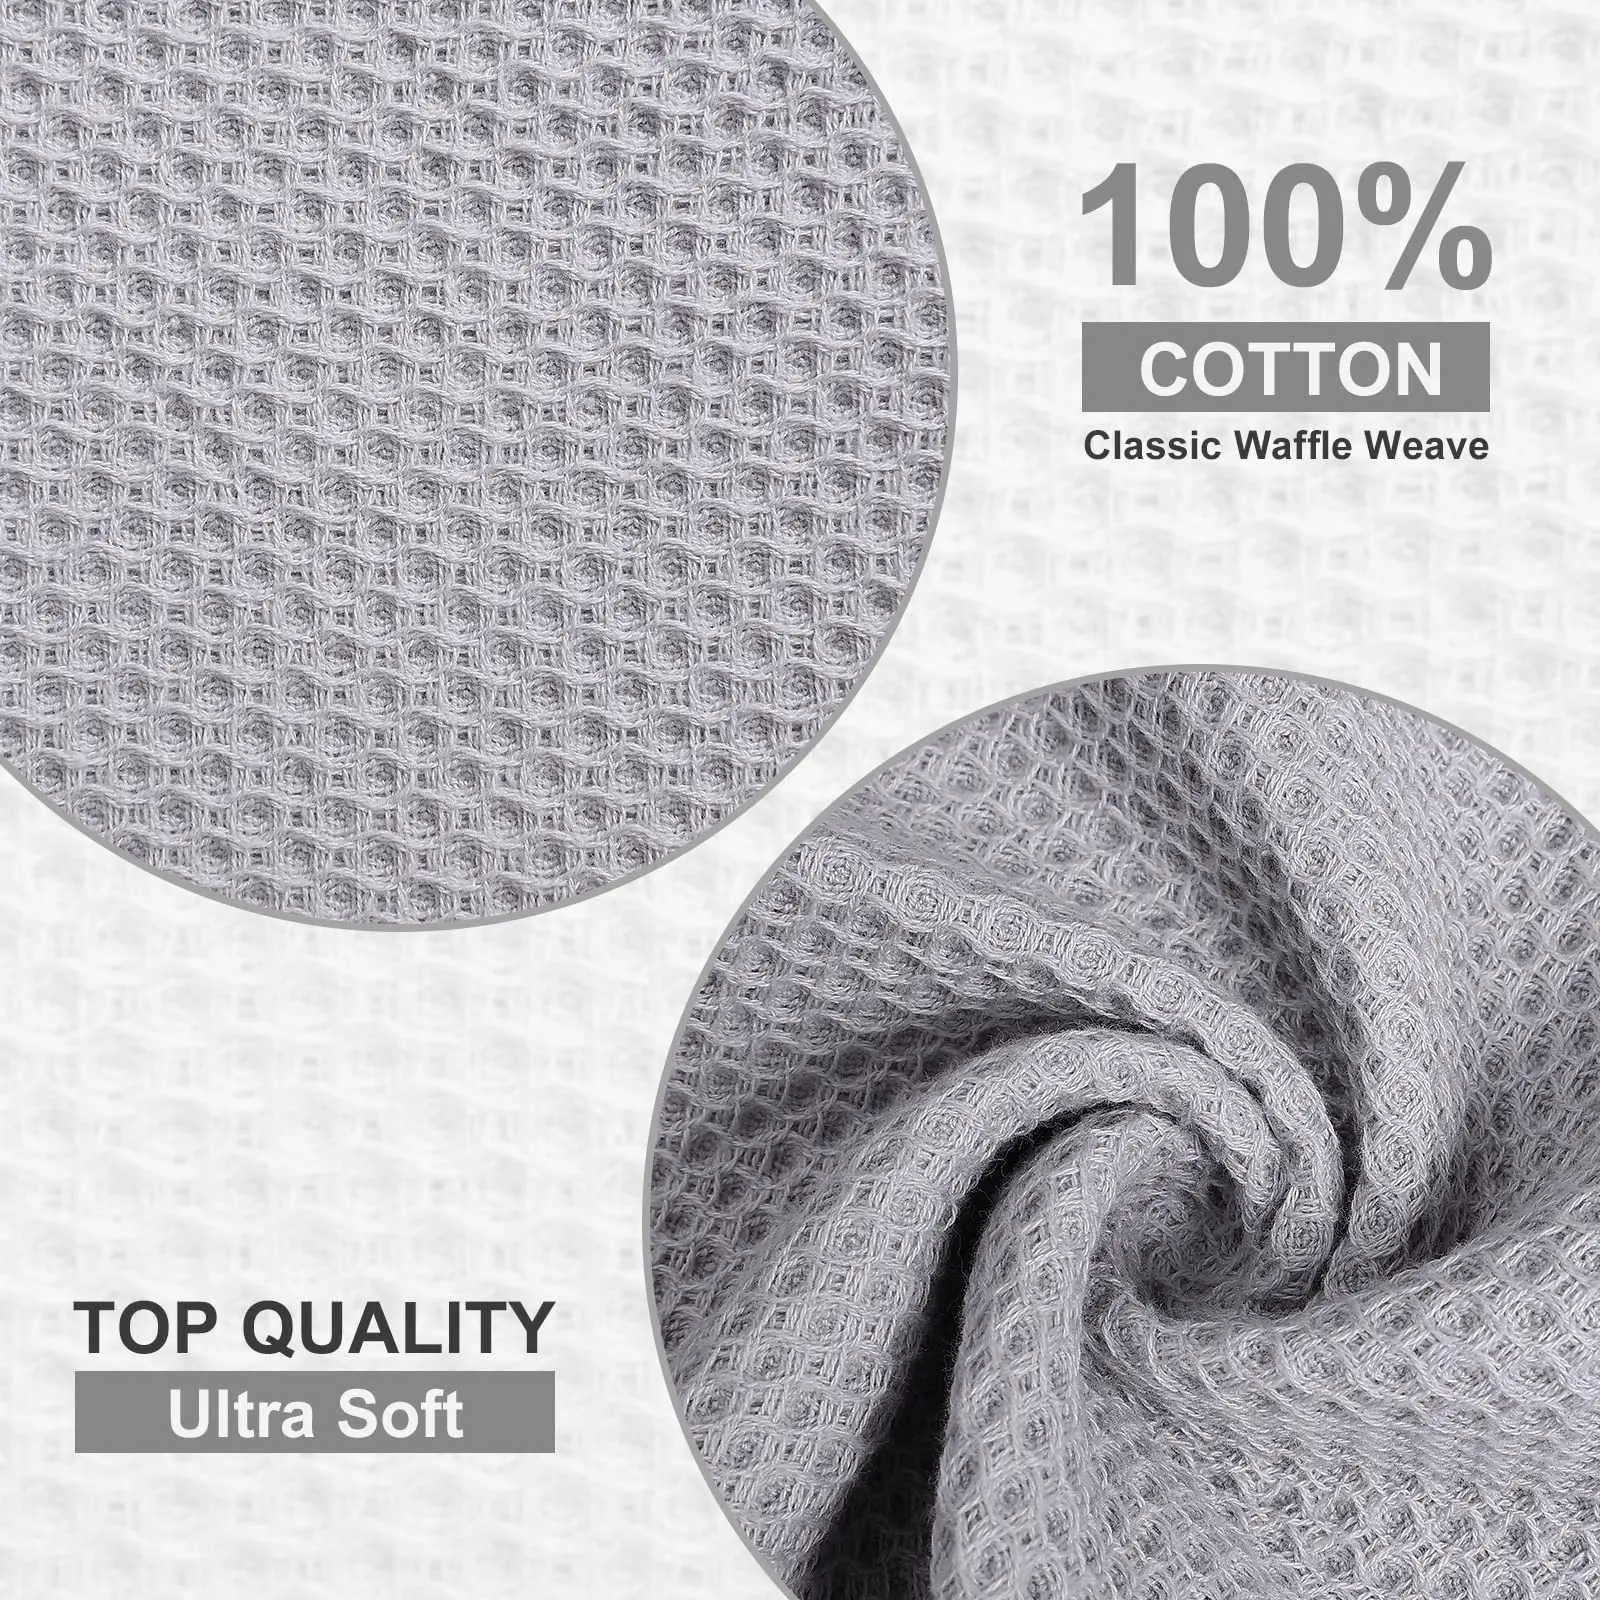 Homaxy 100% Cotton Waffle Weave Kitchen Dish Towels, Ultra Soft Absorbent  Quick Drying Cleaning Towe…See more Homaxy 100% Cotton Waffle Weave Kitchen